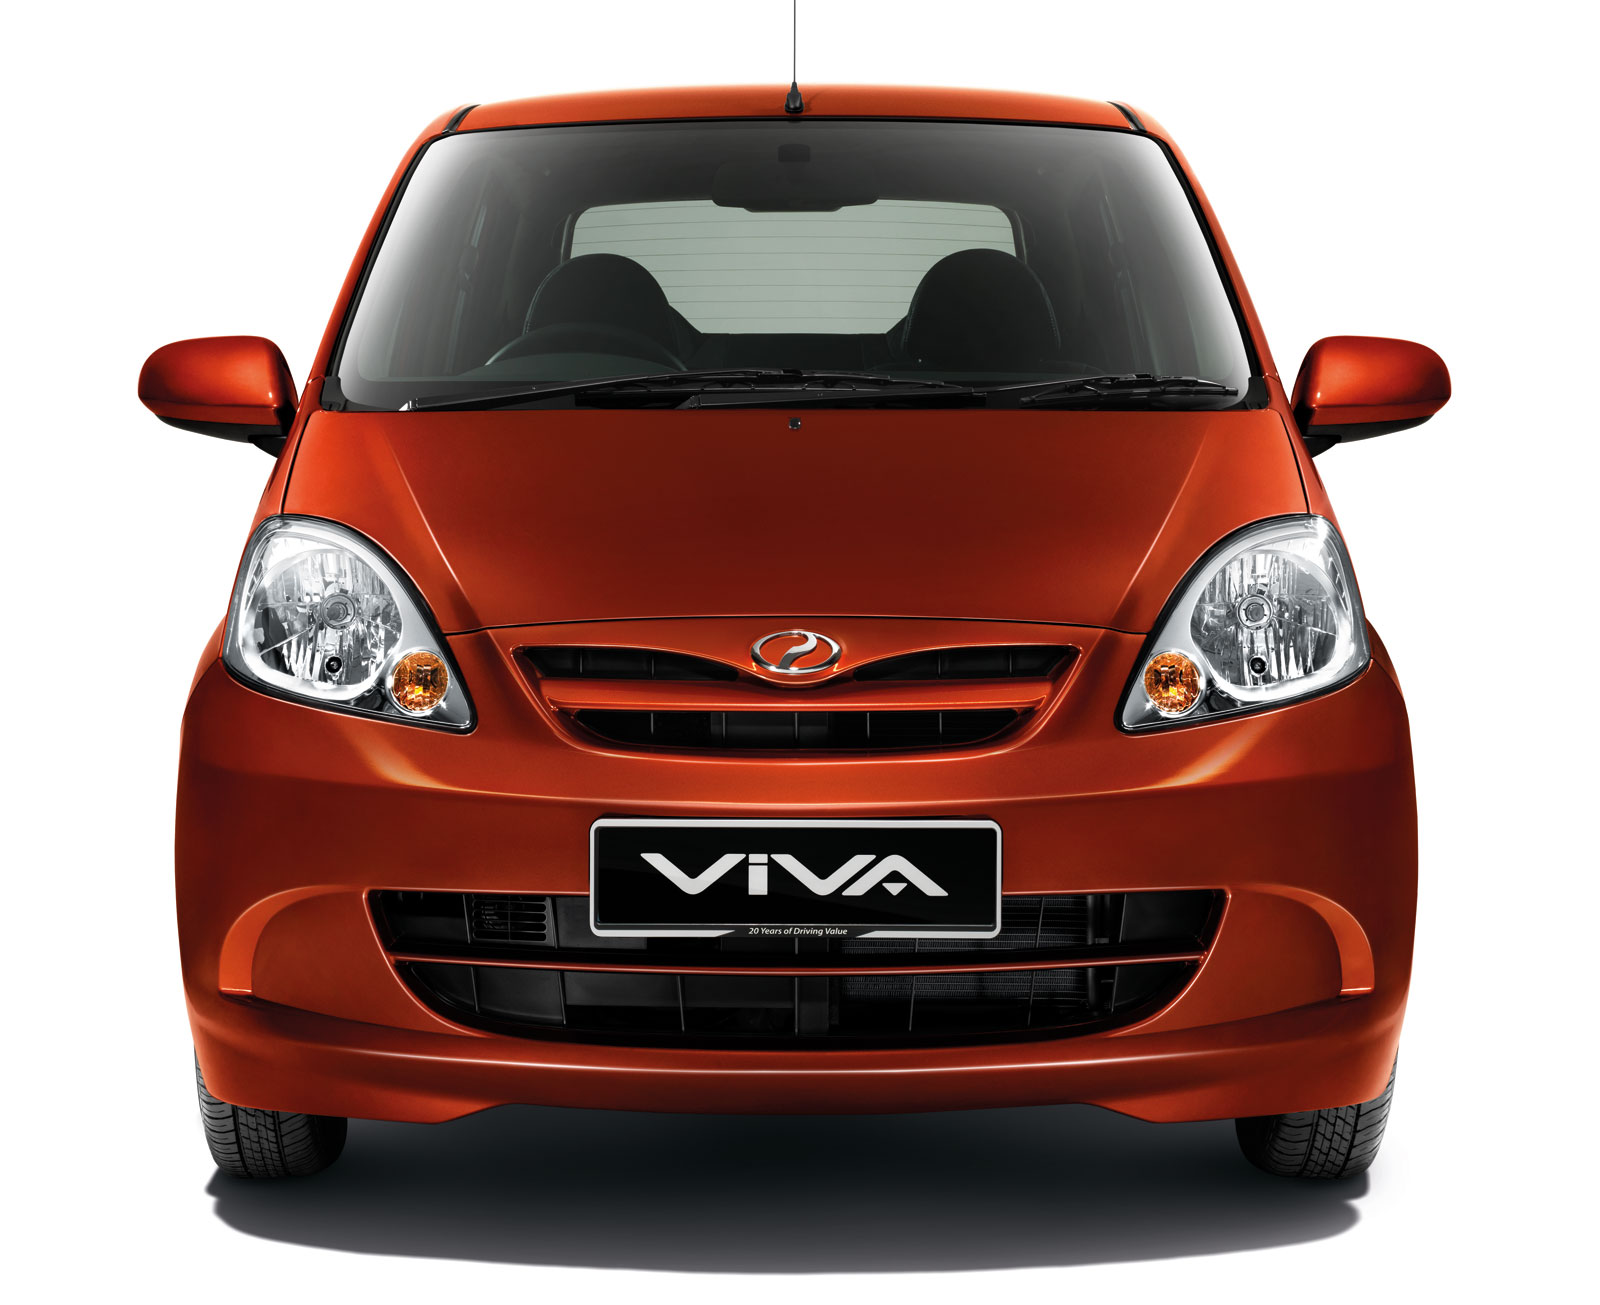 Perodua Viva - prices reduced from RM3,000-RM5,300